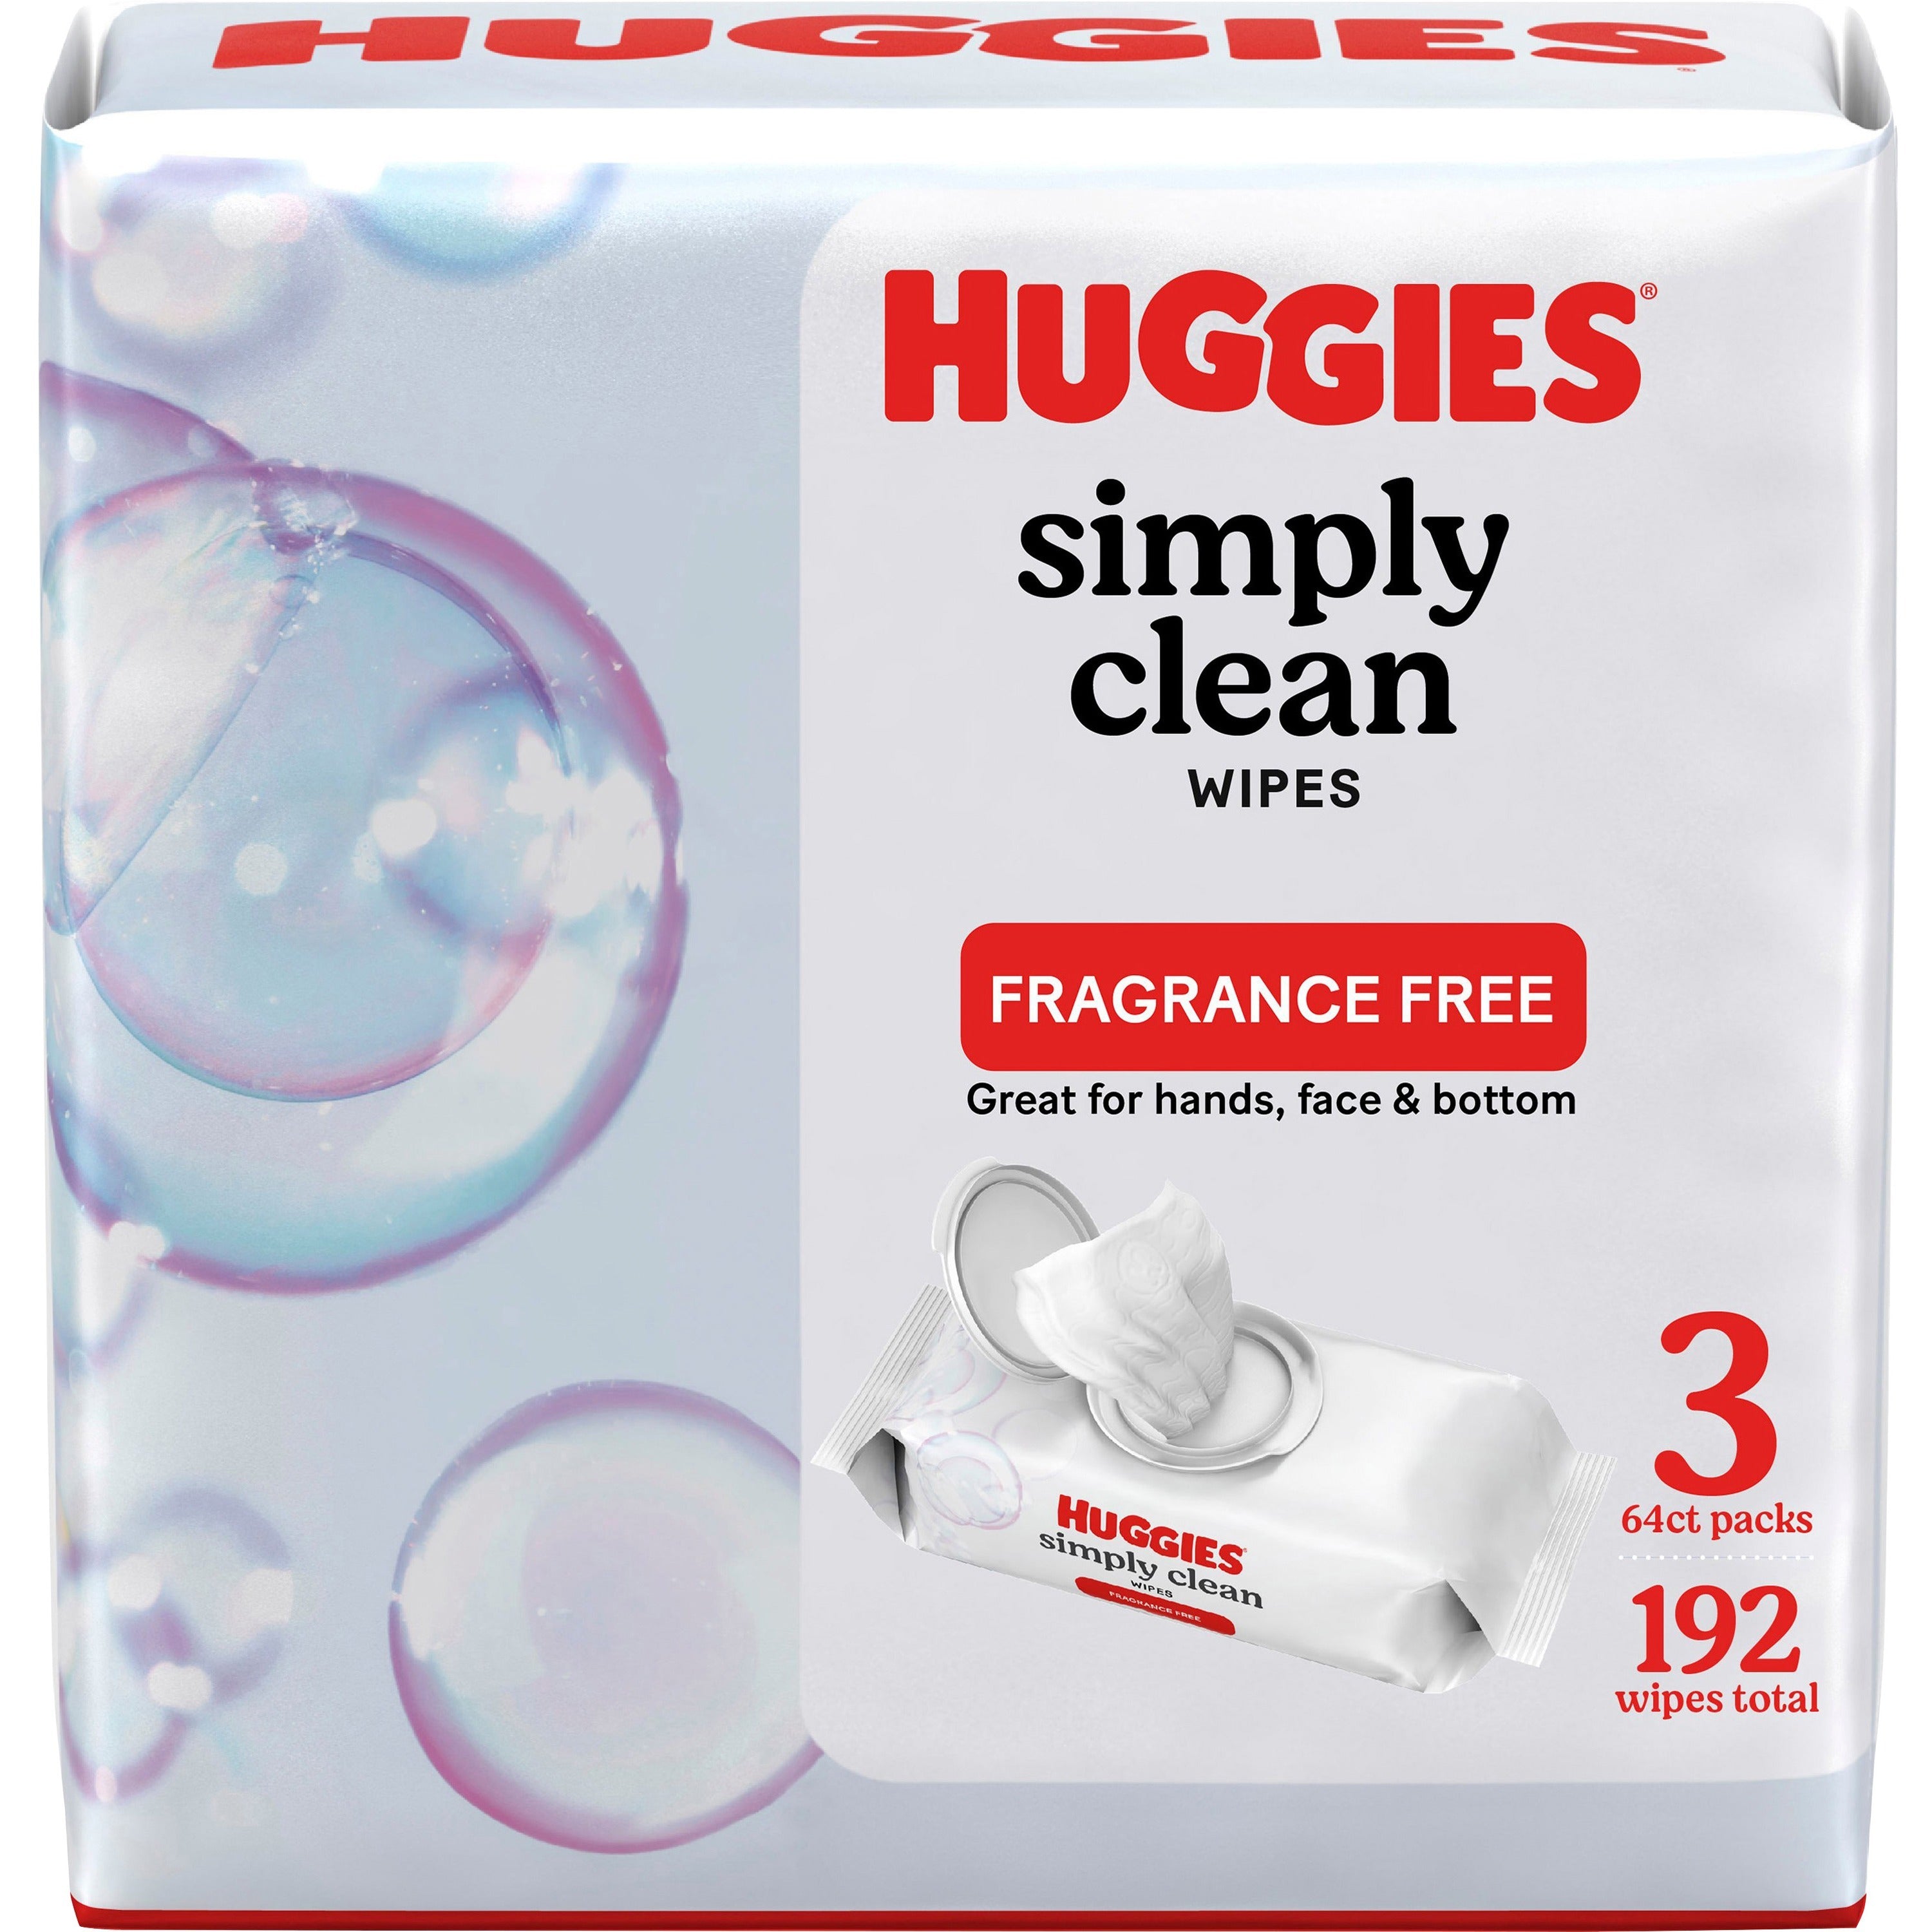 huggies-simply-clean-wipes-white-unscented-hypoallergenic-ph-balanced-fragrance-free-alcohol-free-paraben-free-phenoxyethanol-free-for-hand-skin-face-1-each_kcc54483 - 1